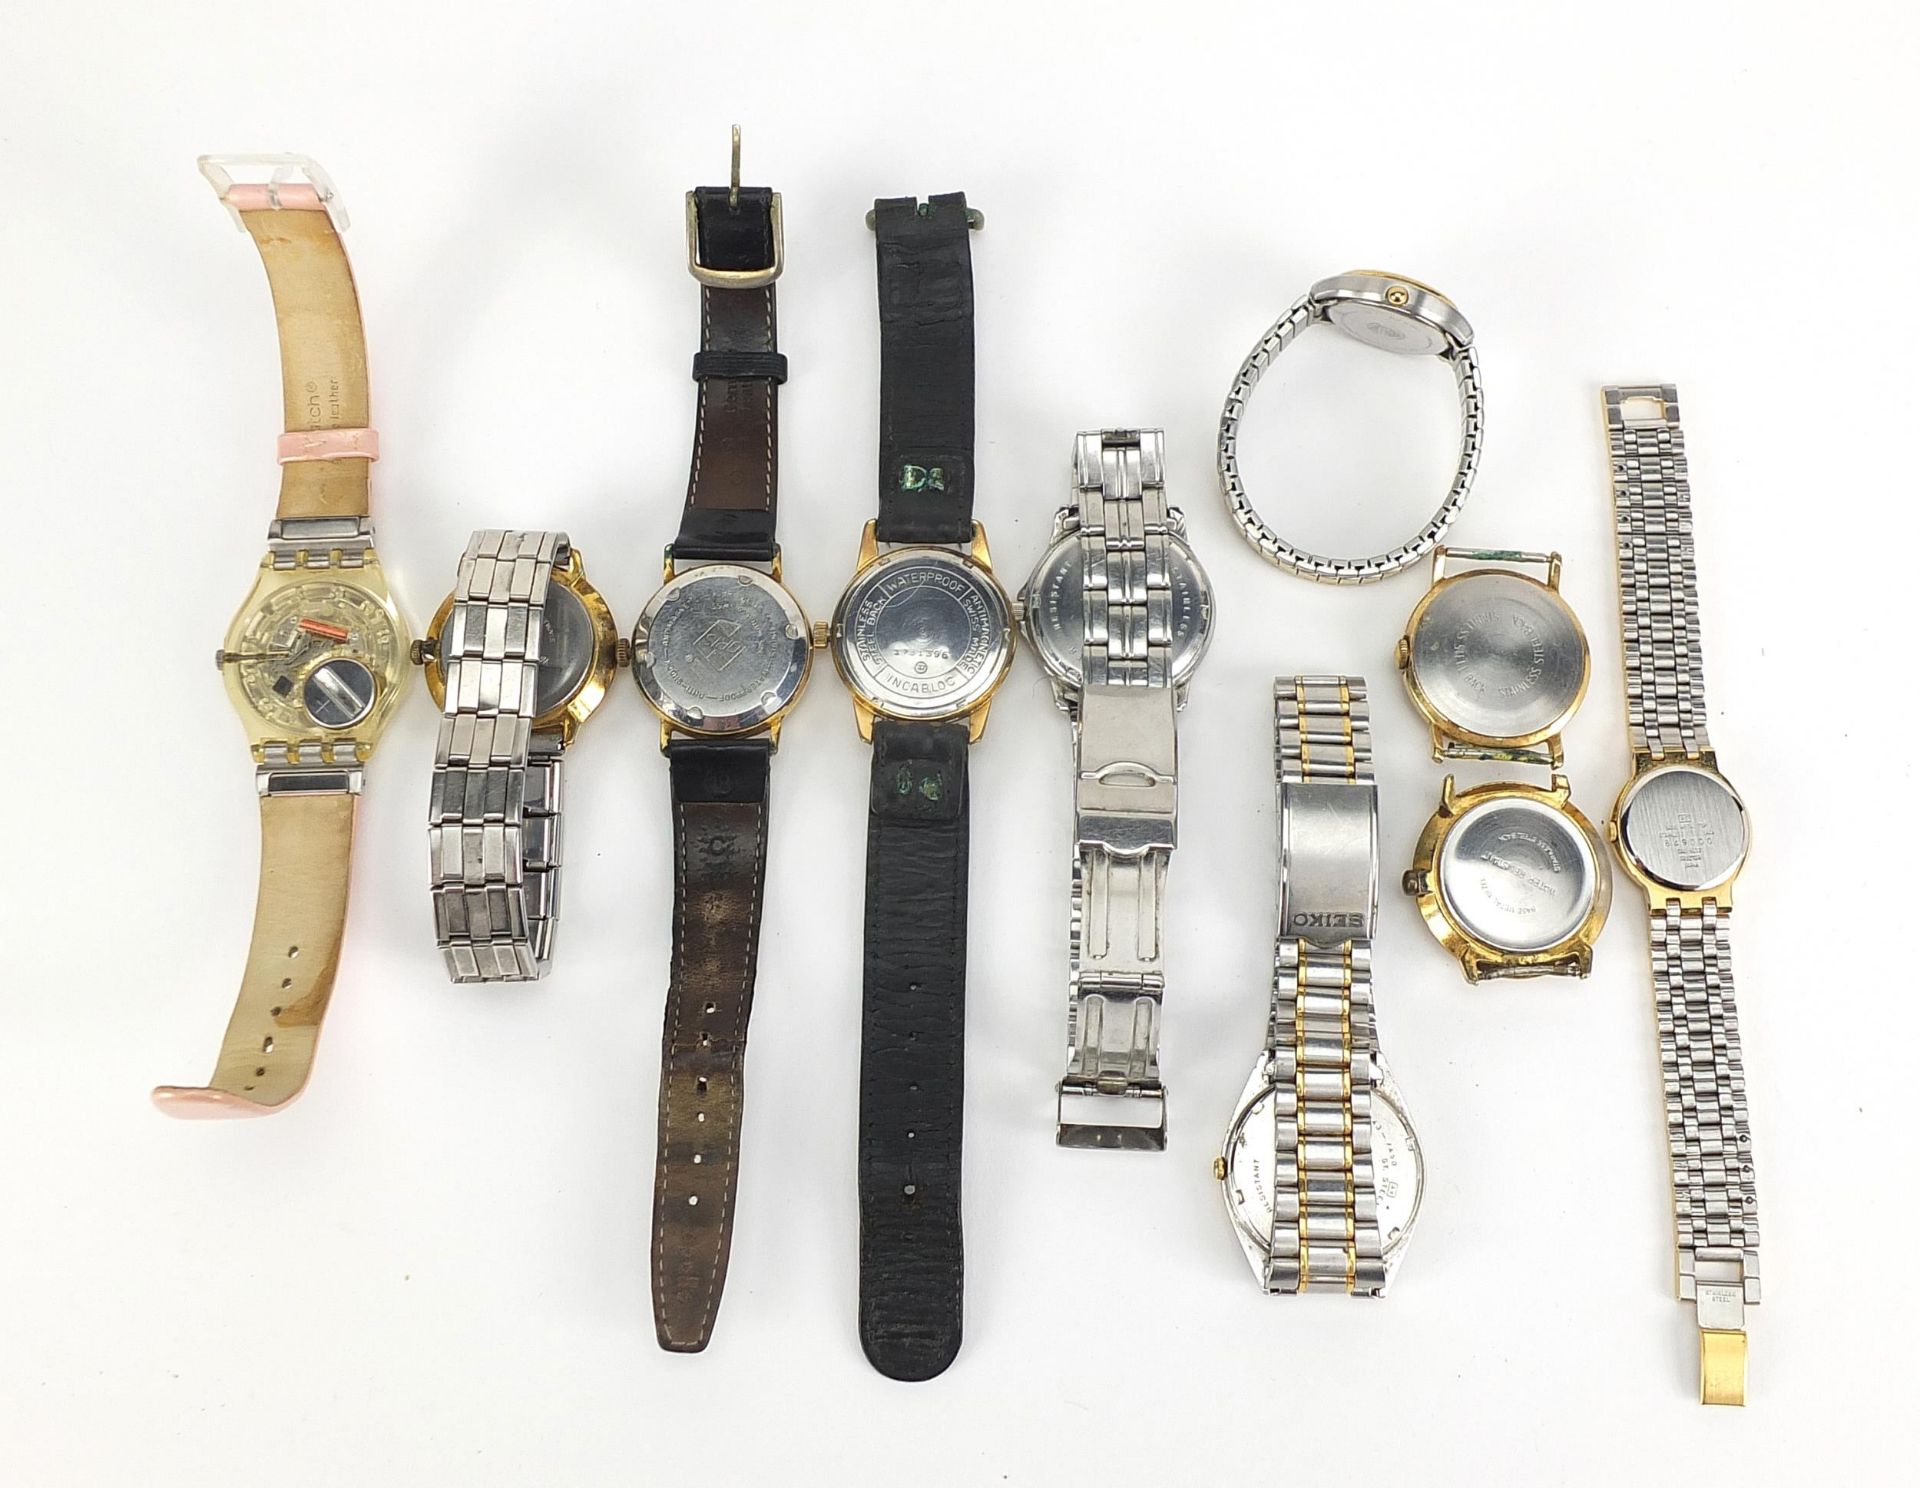 Vintage and later gentlemen's and ladies wristwatches including Renel, Timex, Seiko and Oris - Image 4 of 7